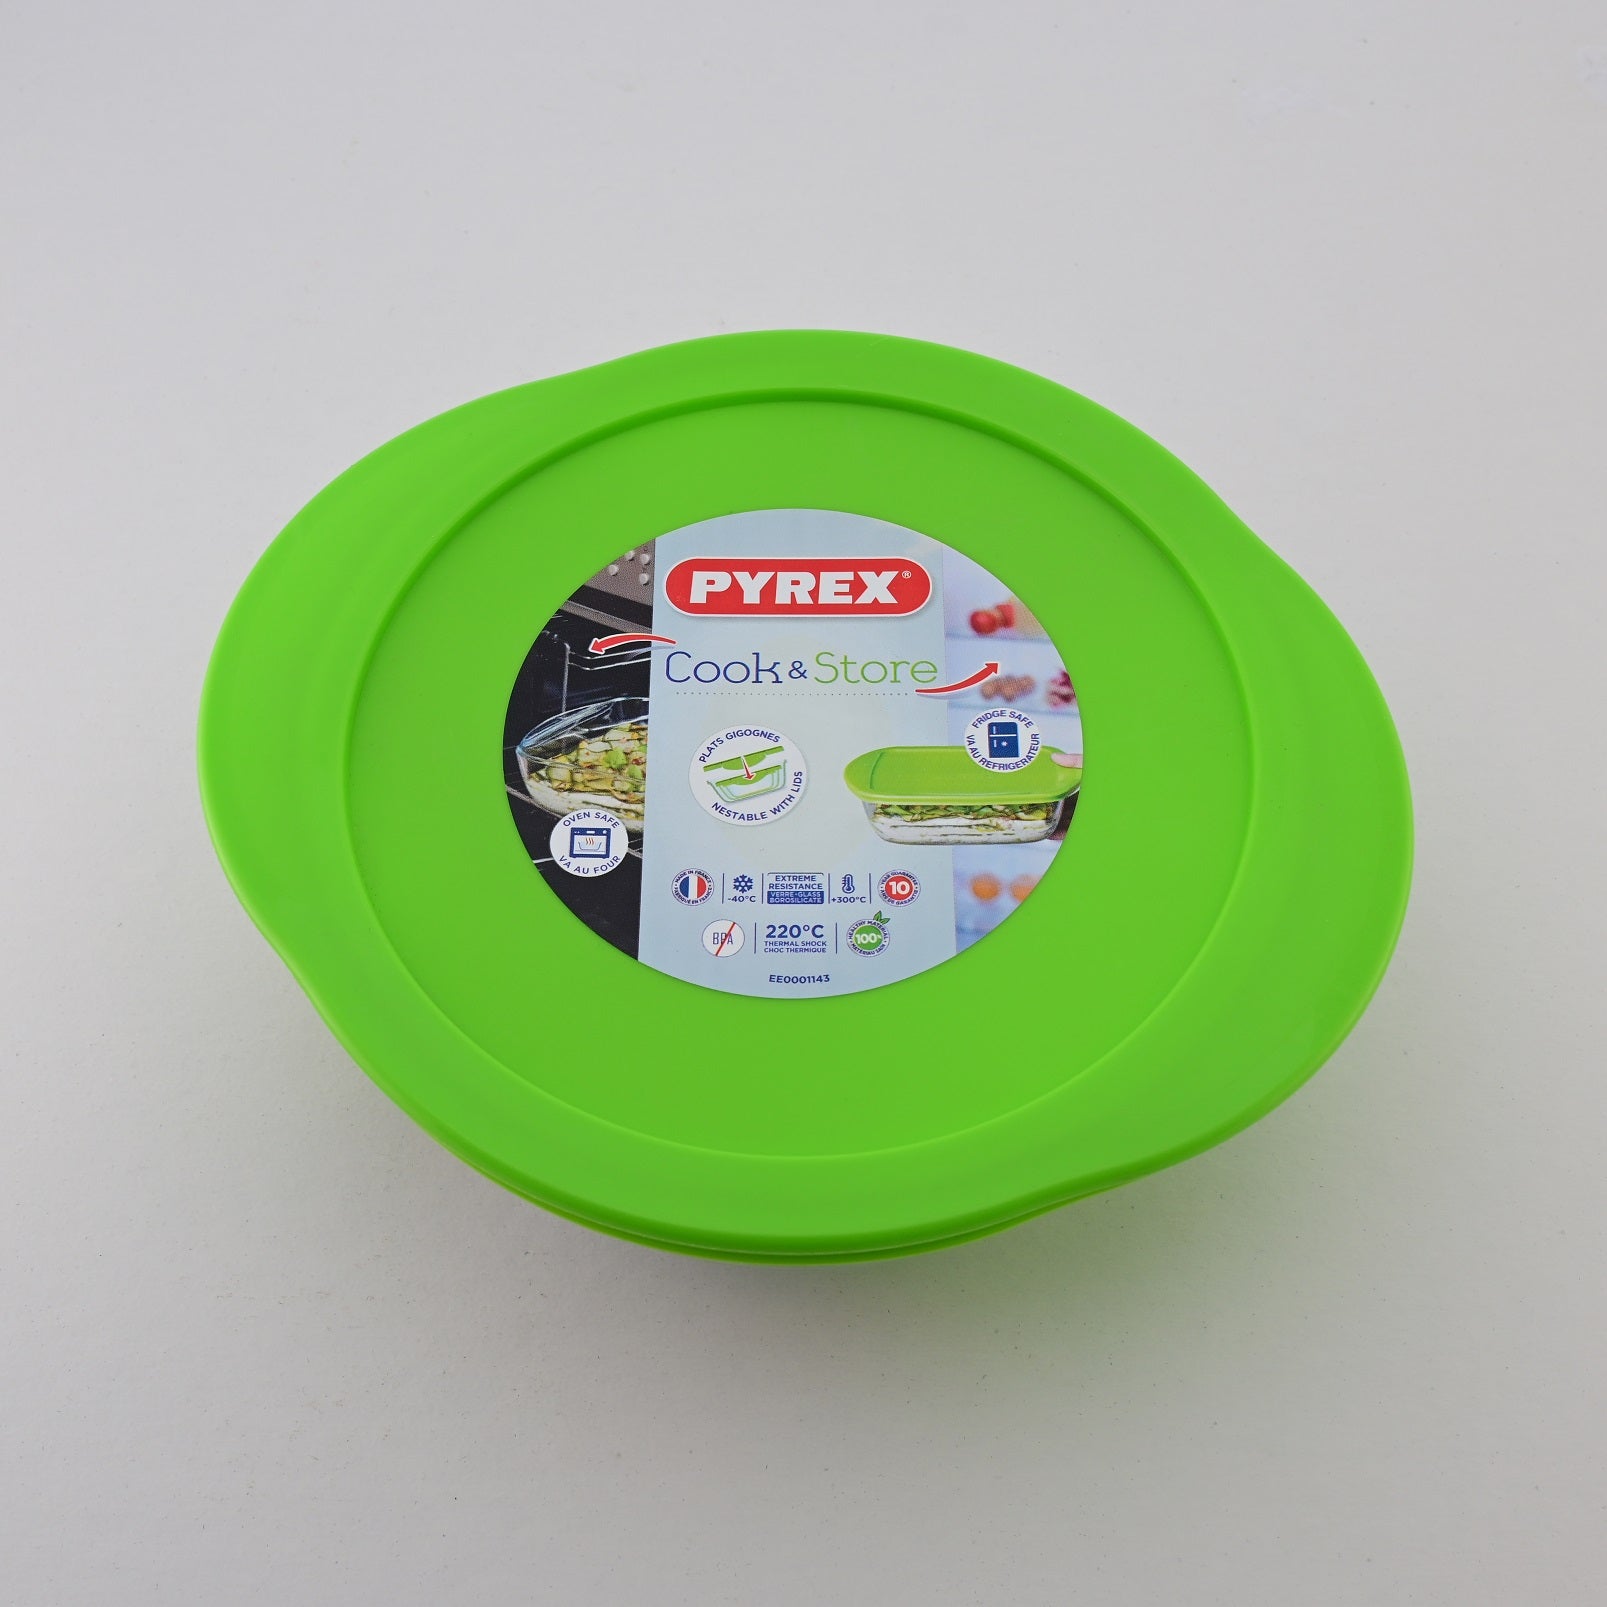 Pyrex Cook and Store 1.1 Liters Round Glass Roaster with Plastic lid and Easy Grip